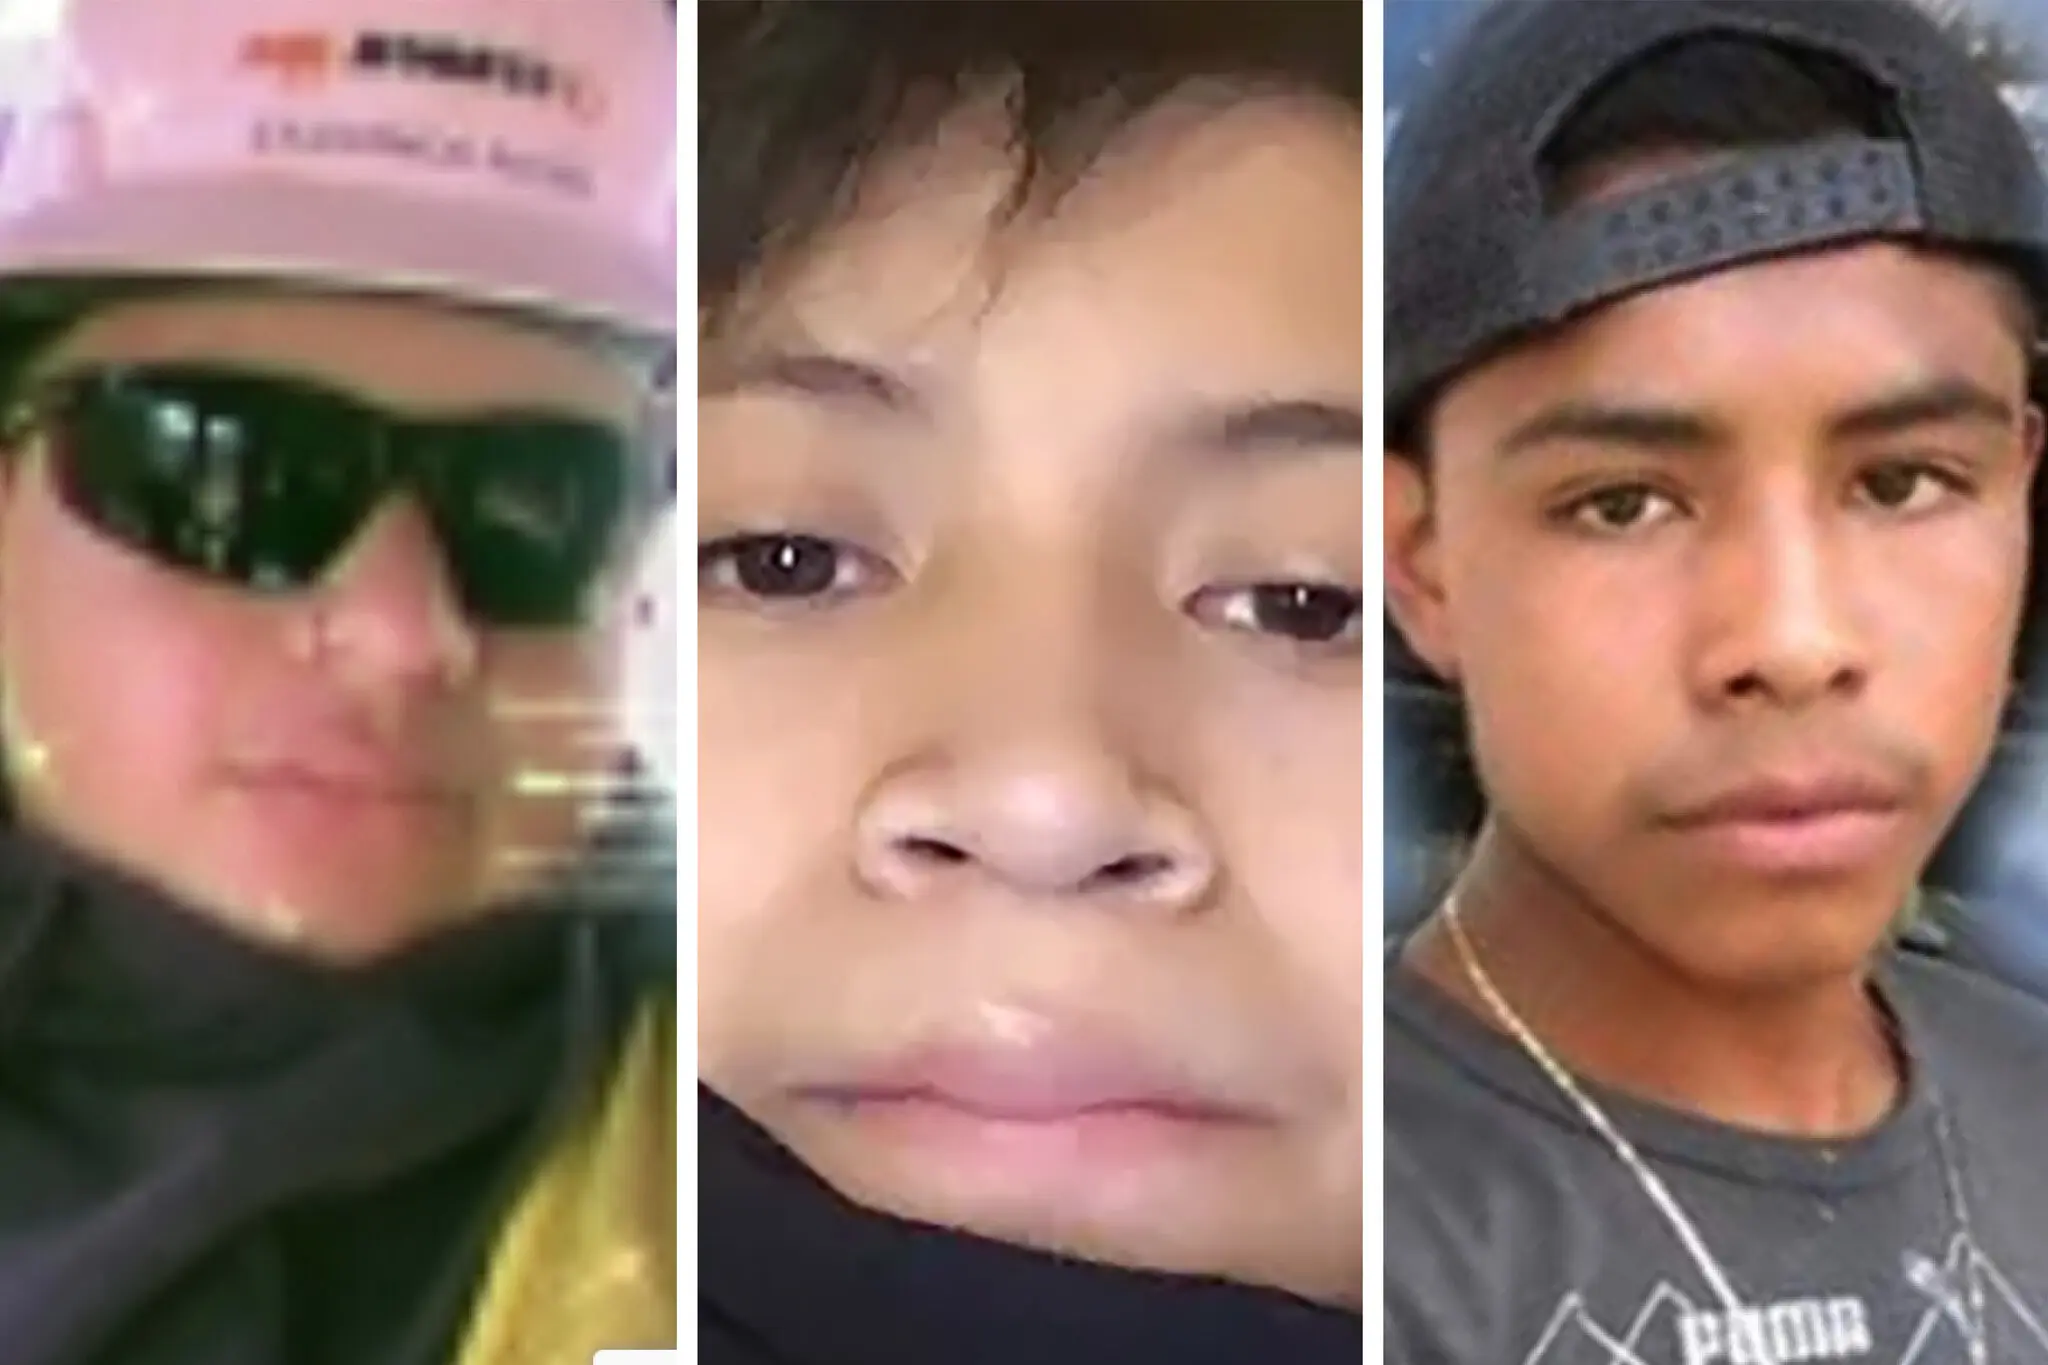 Alone and exploited, migrant children work brutal jobs across the United States. From left: Oscar Nambo Dominguez, 16, was crushed last year under an earthmover near Atlanta. Edwin Ajacalon, 14, was hit by a car while delivering food on a bike in Brooklyn. Juan Mauricio Ortiz, 15, died on his first day of work for an Alabama roofing company when he fell about 50 feet. Photo: The New York Times